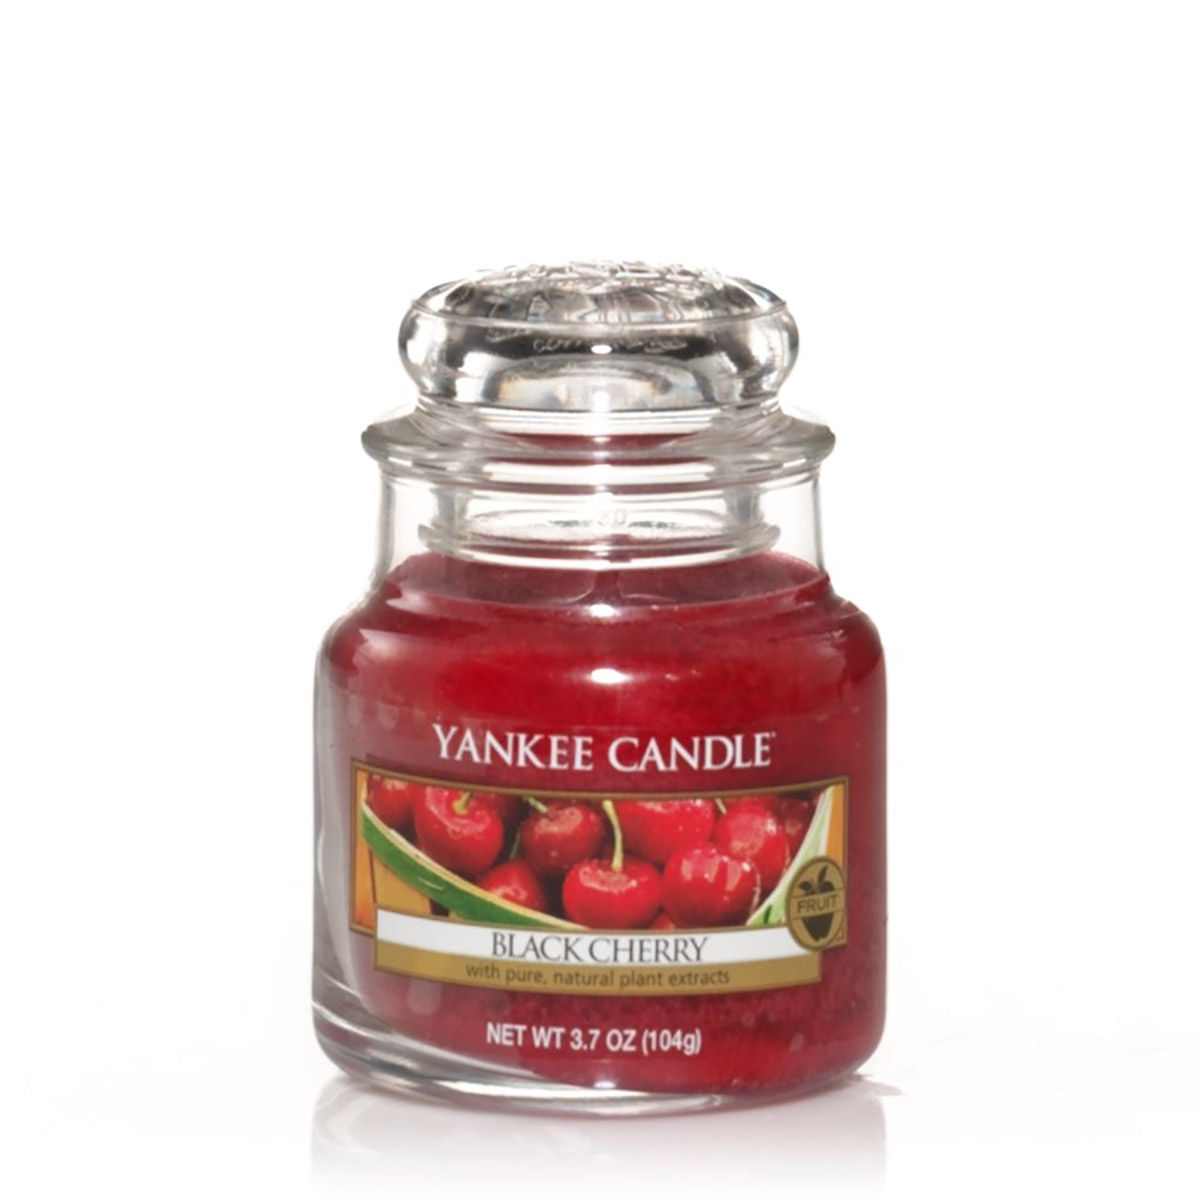 Buy Yankee Candle Classic Small Jar Black Cherry Scented Candles Online